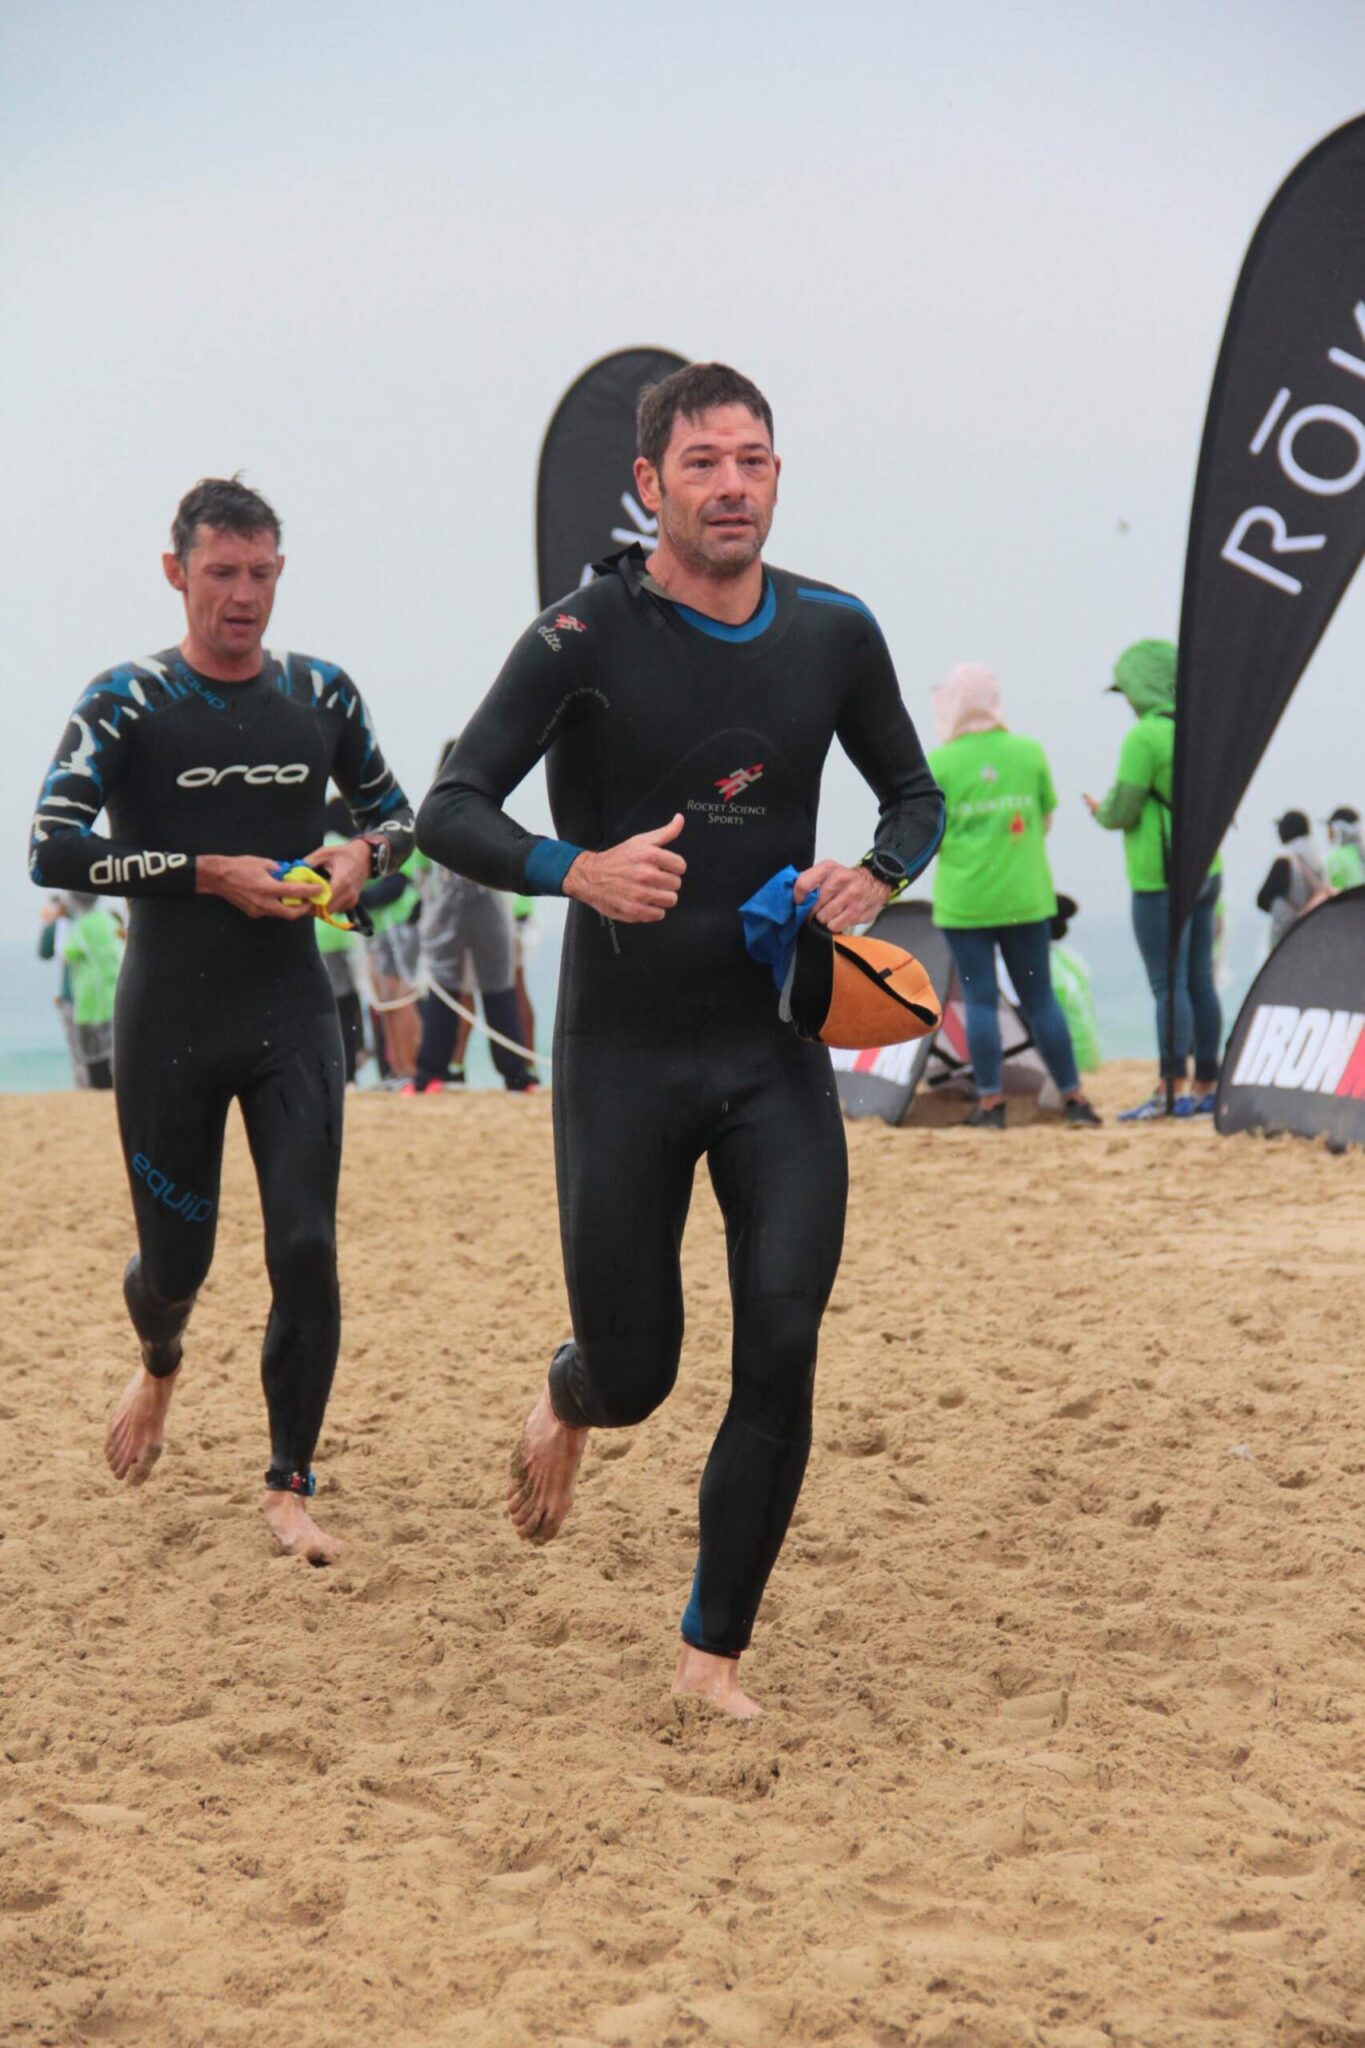 Don’t Forget to Swim: Why I don’t think Ironman should let the Swim be Optional